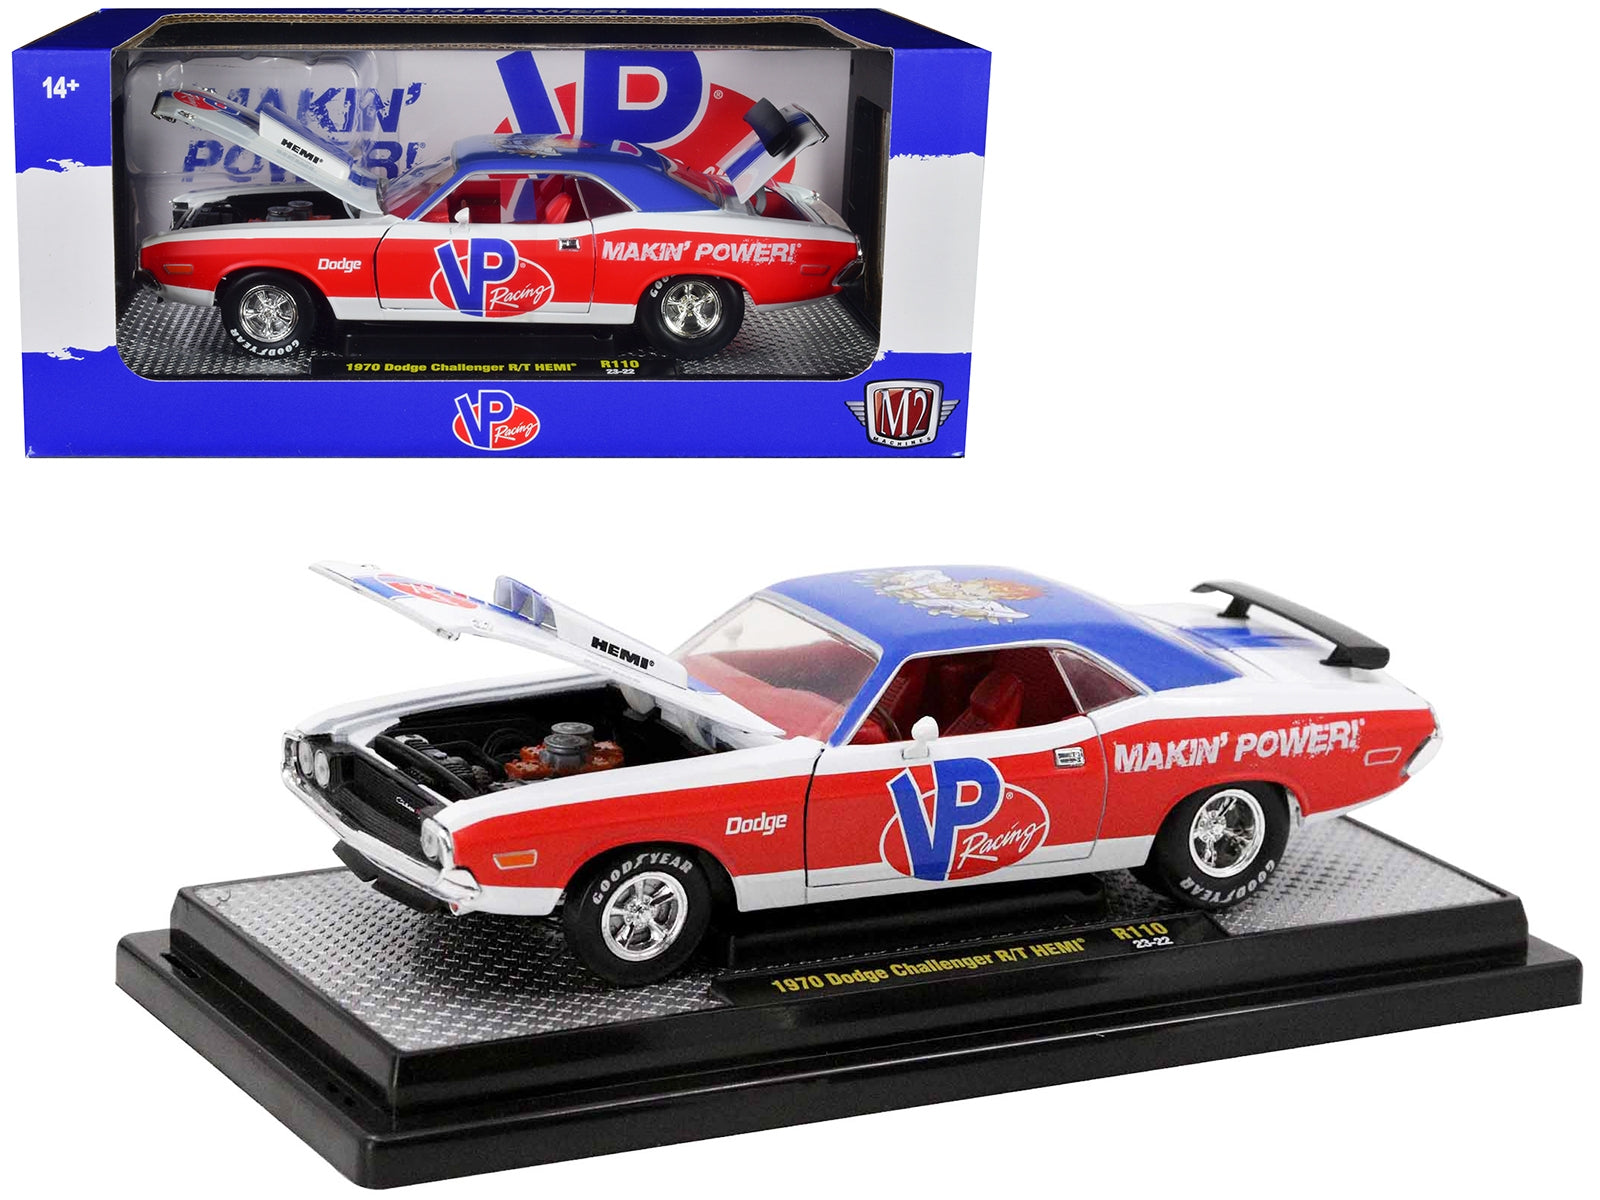 1970 Dodge Challenger R/T Hemi White with Red and Blue Stripes with Red Interior "VP Racing" Limited Edition to 5710 pieces Worldwide 1/24 Diecast Model Car by M2 Machines